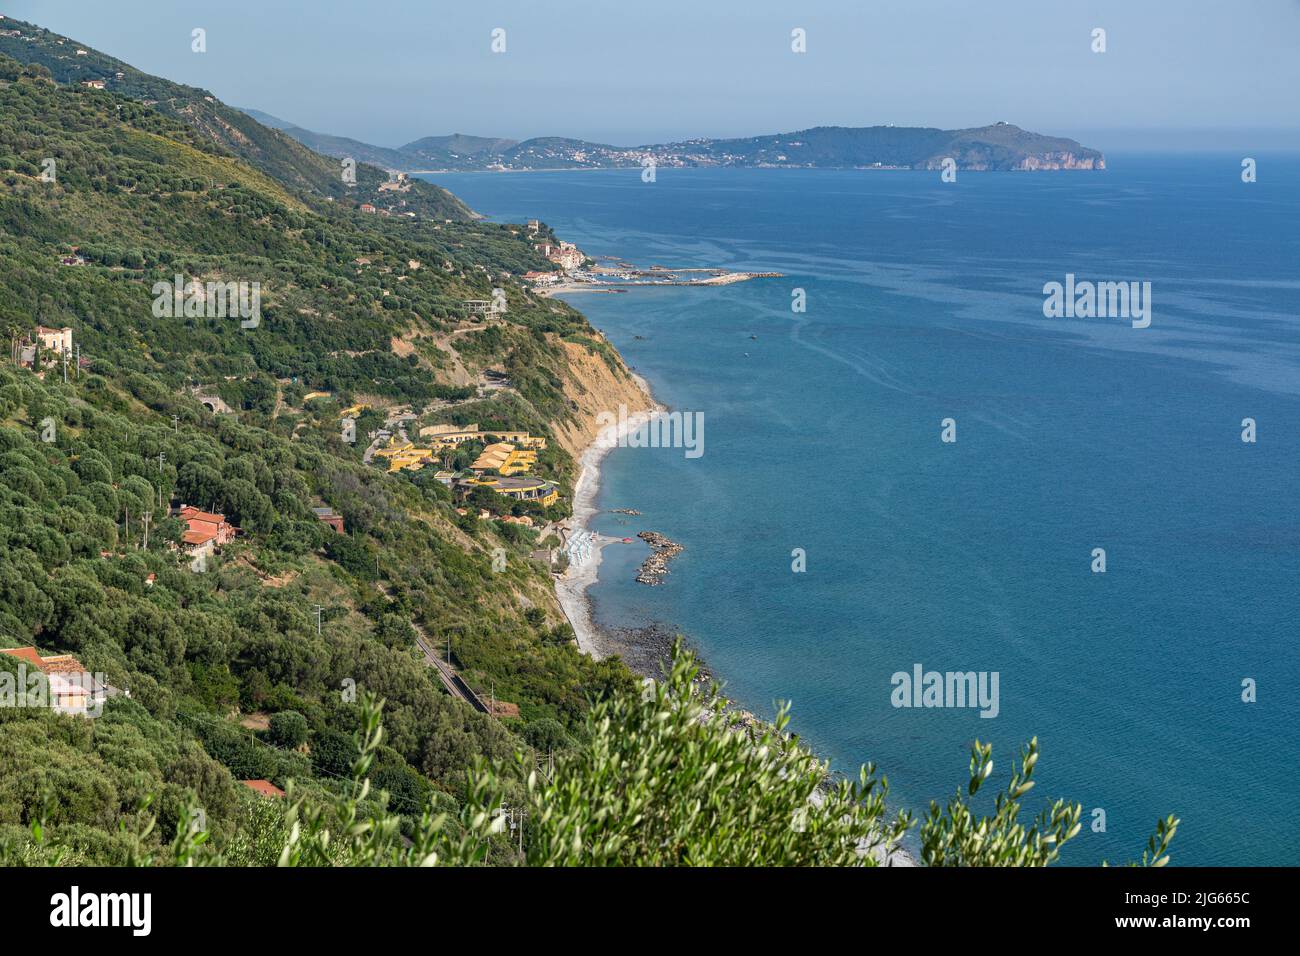 Scenic panoramic view of Cilento coast with beautiful beaches and clear sea, Campania region, Italy Stock Photo